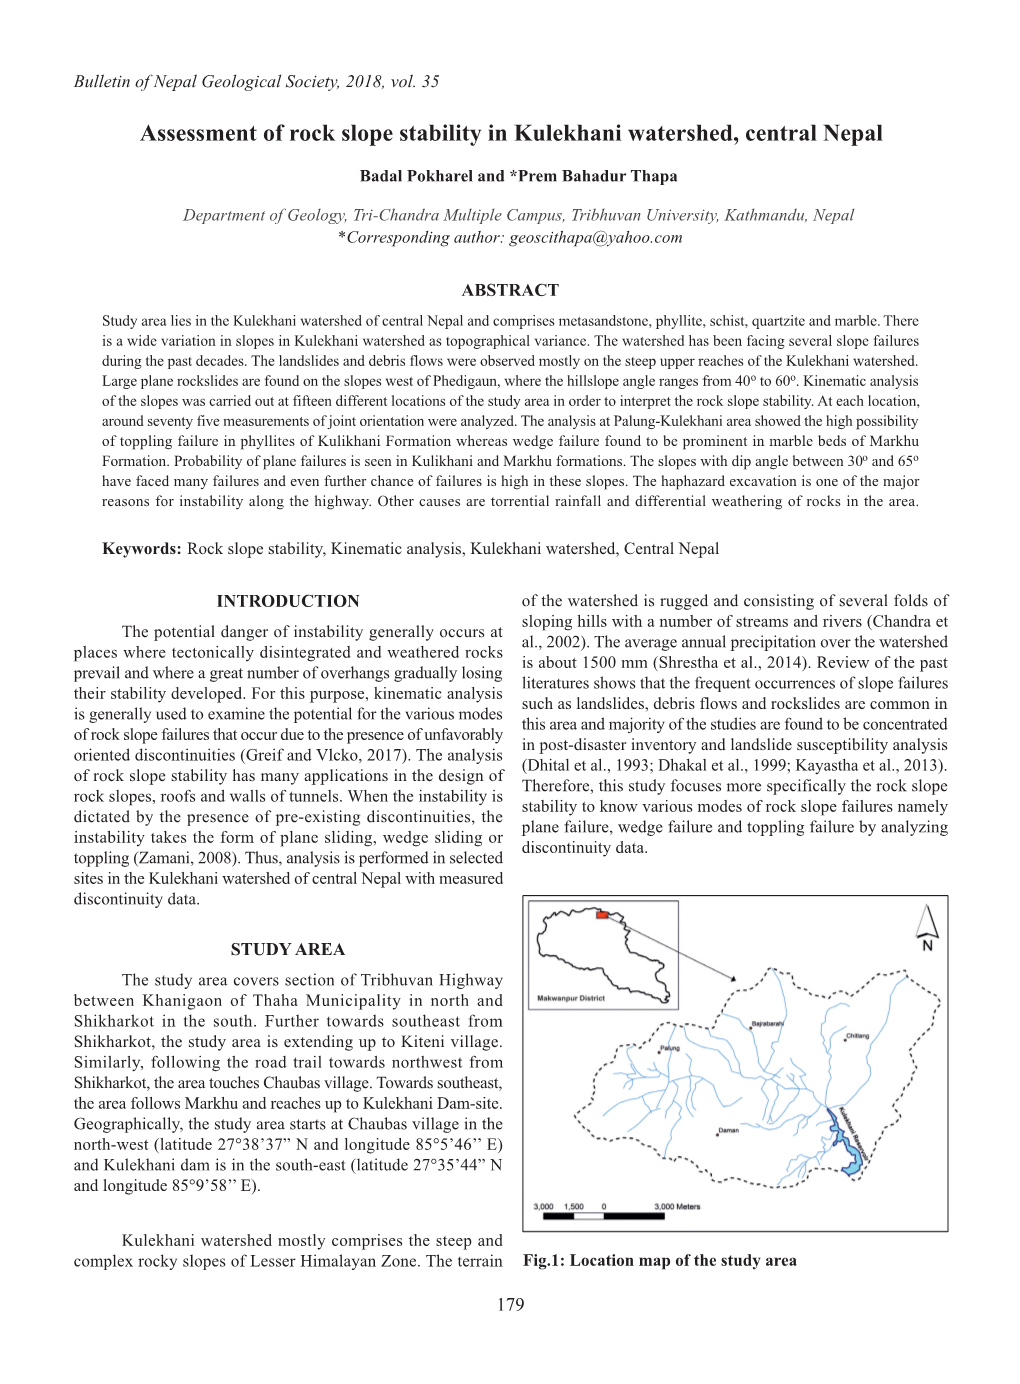 Assessment of Rock Slope Stability in Kulekhani Watershed, Central Nepal